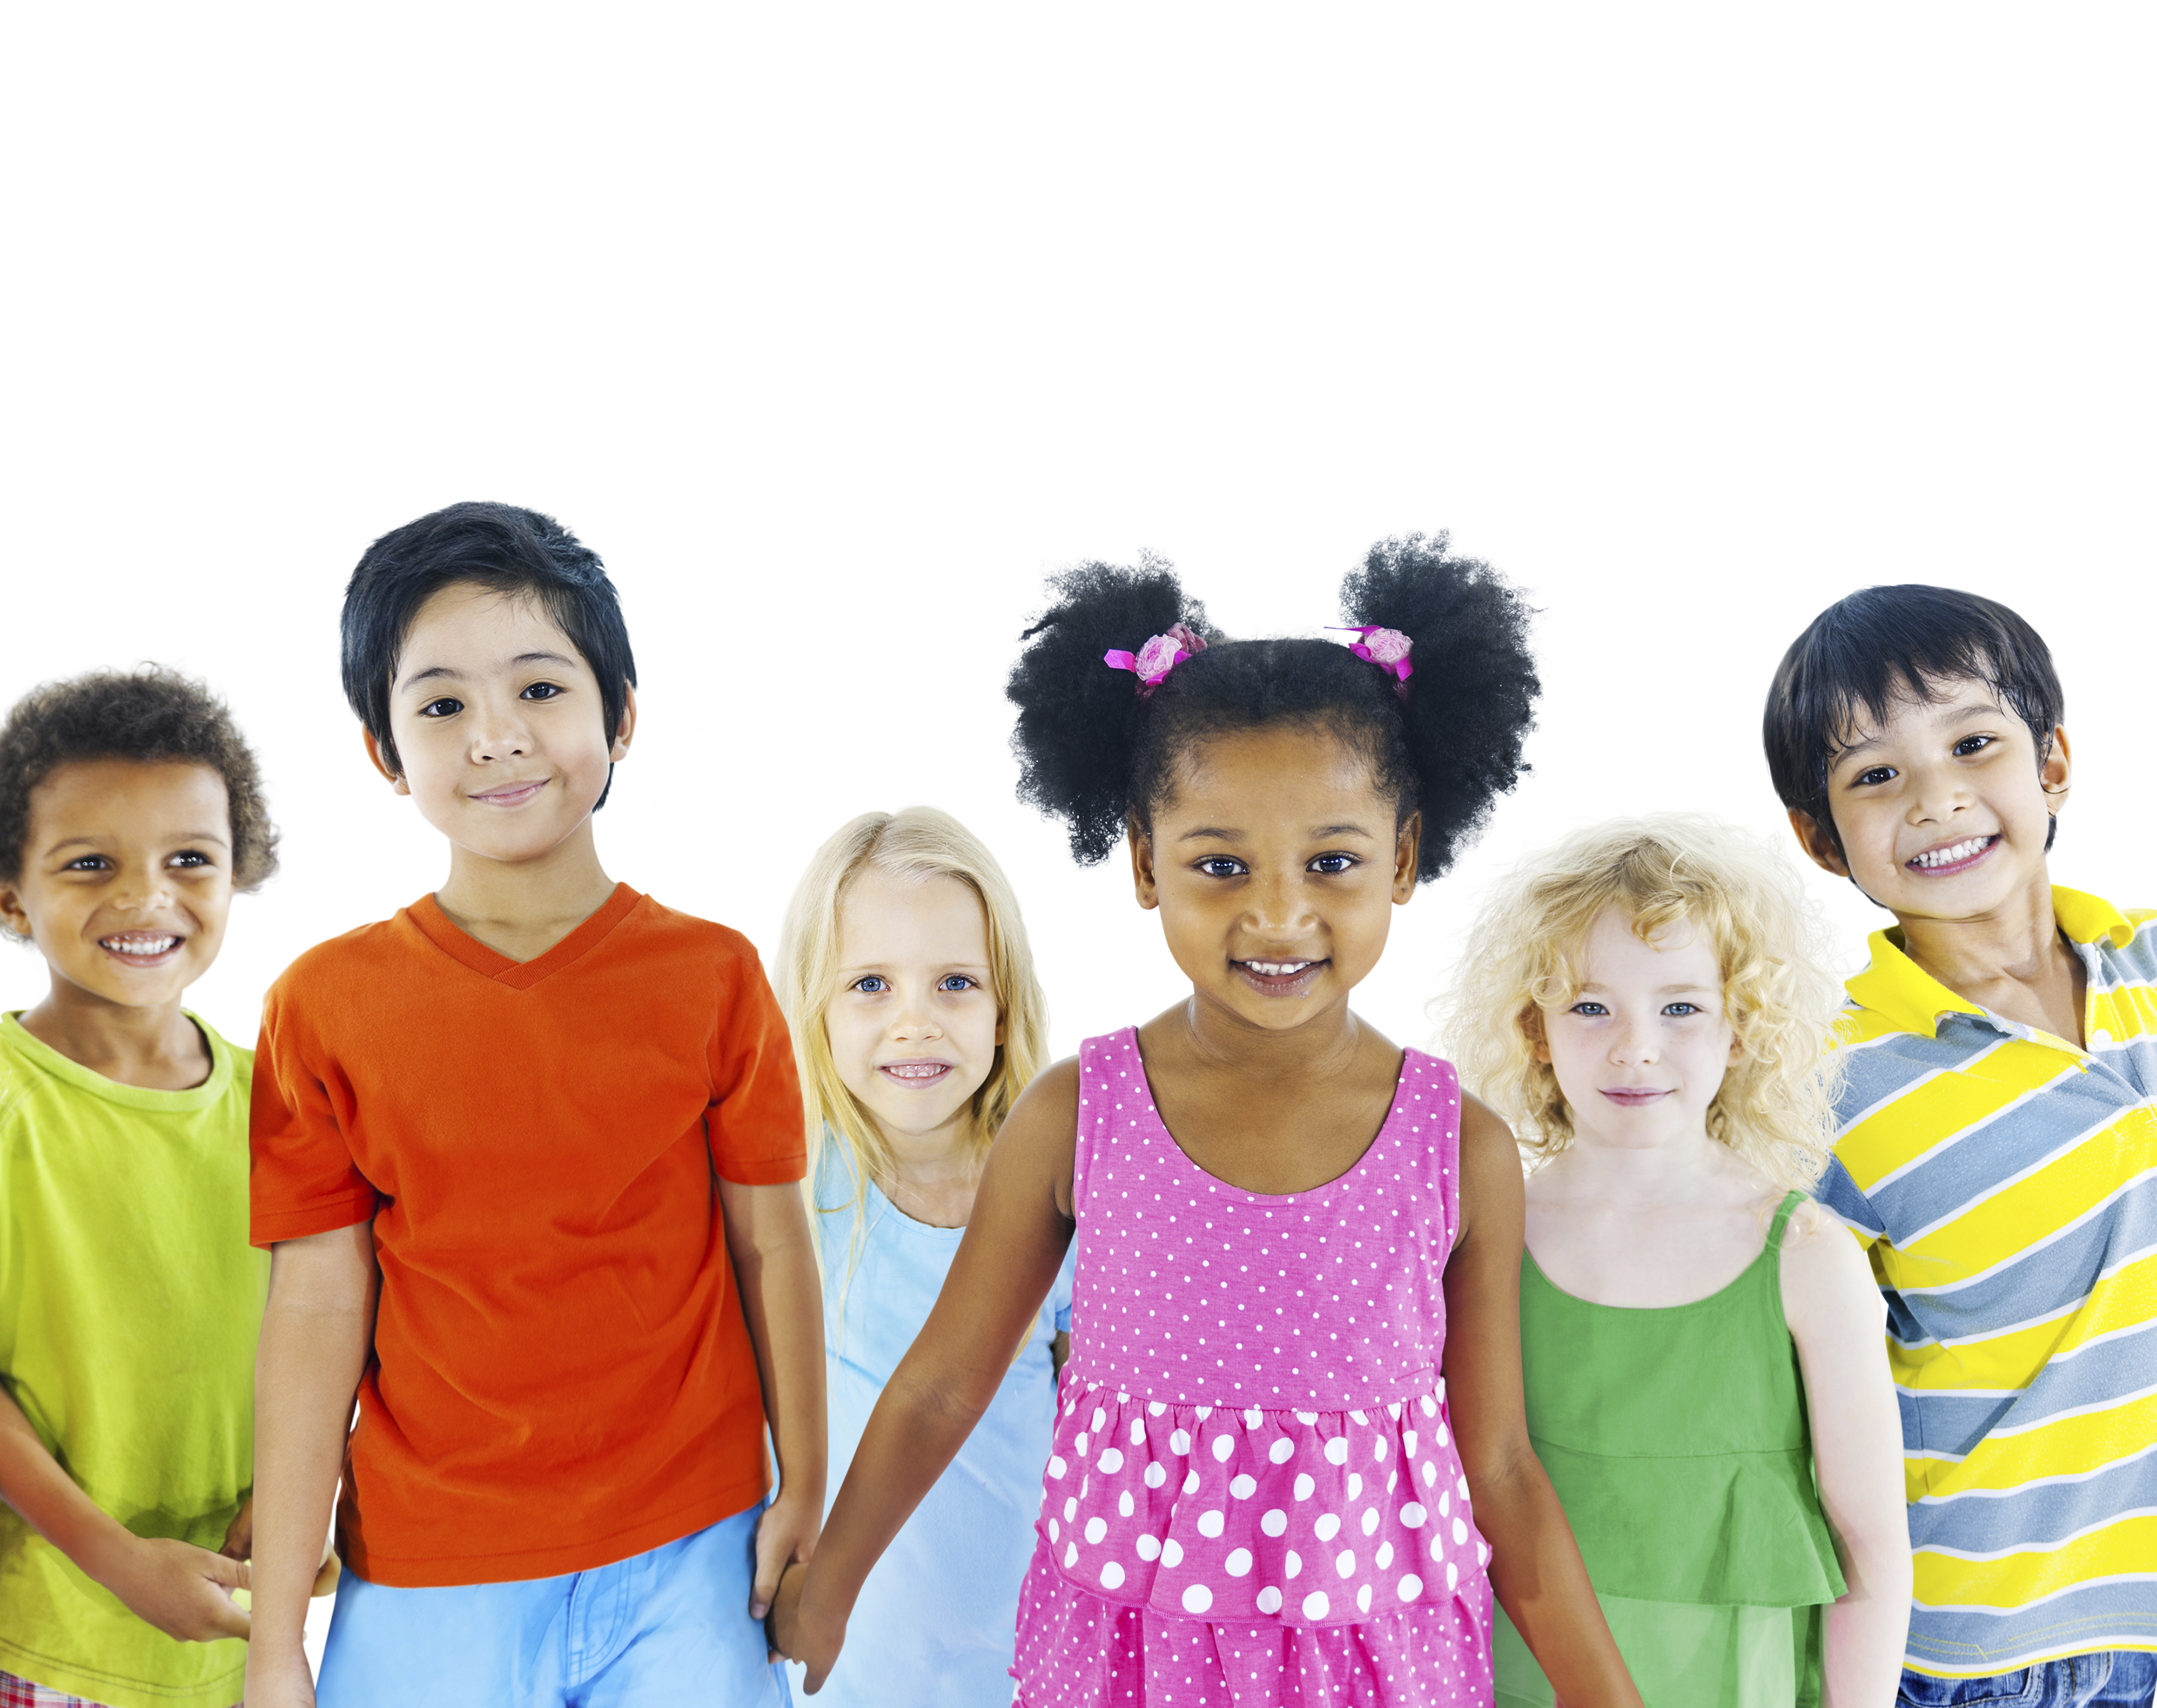 Photo of children ages 3-5